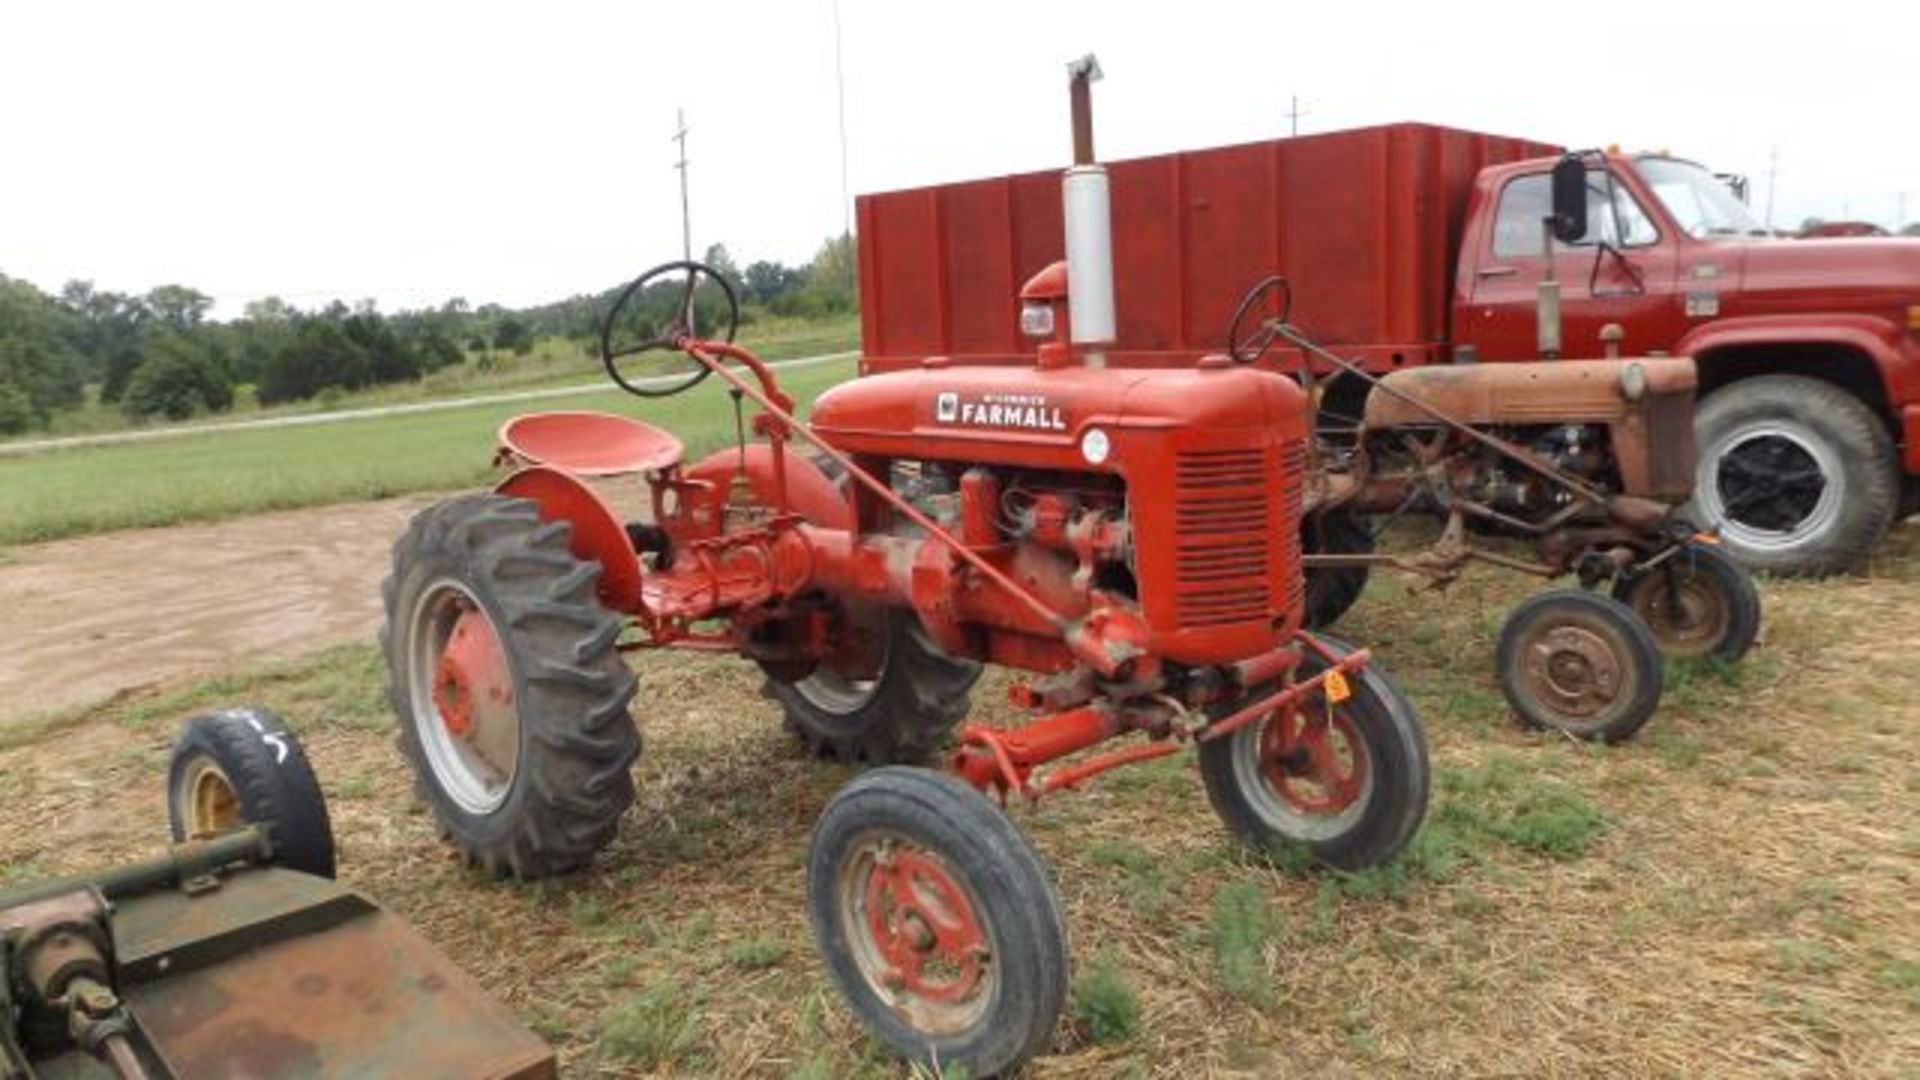 Lot 597 Farmall A Tractor, 1939 - Image 2 of 3